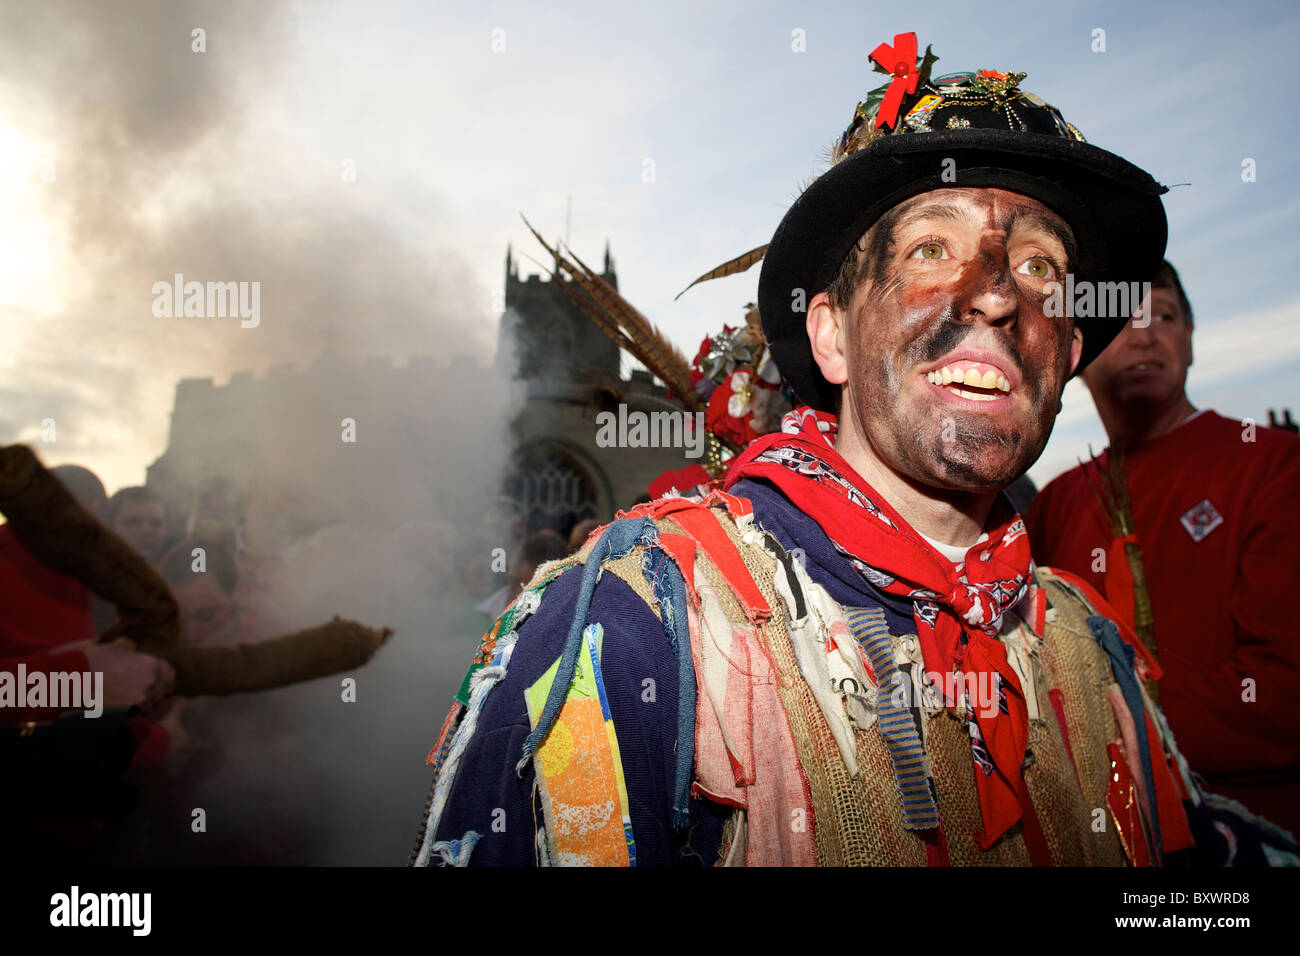 The Haxey Hood, a traditional event held in the village of Haxey, North Lincolnshire on the Twelfth Day of Christmas. The Fool, Stock Photo